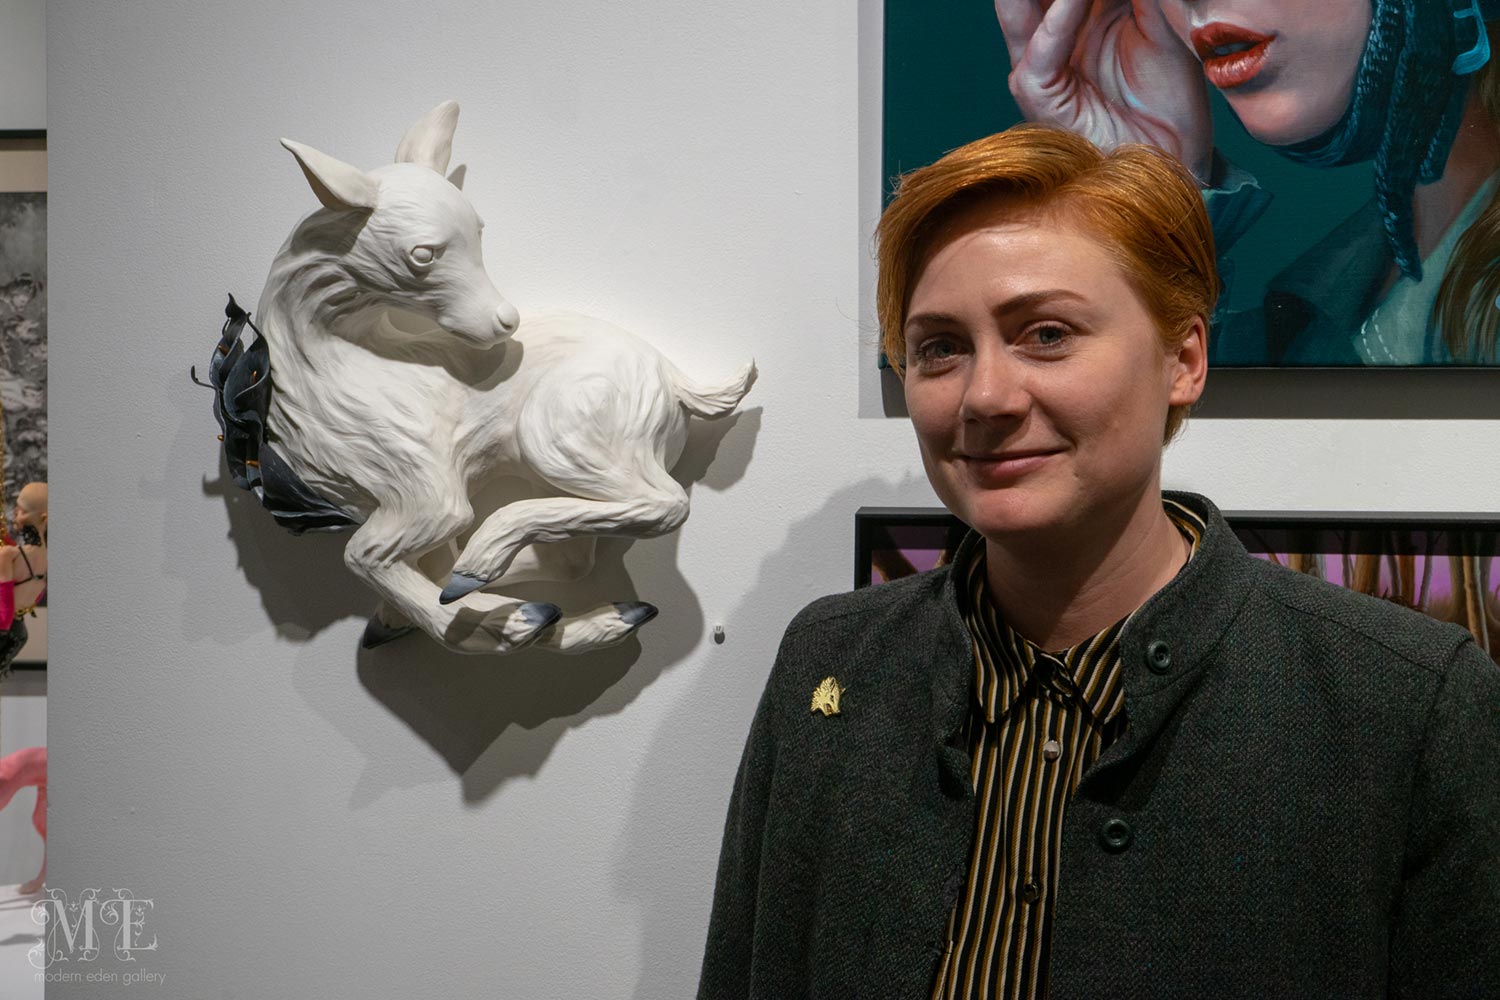 Lorren Lowry with her artwork at Modern Eden Gallery, January 2019